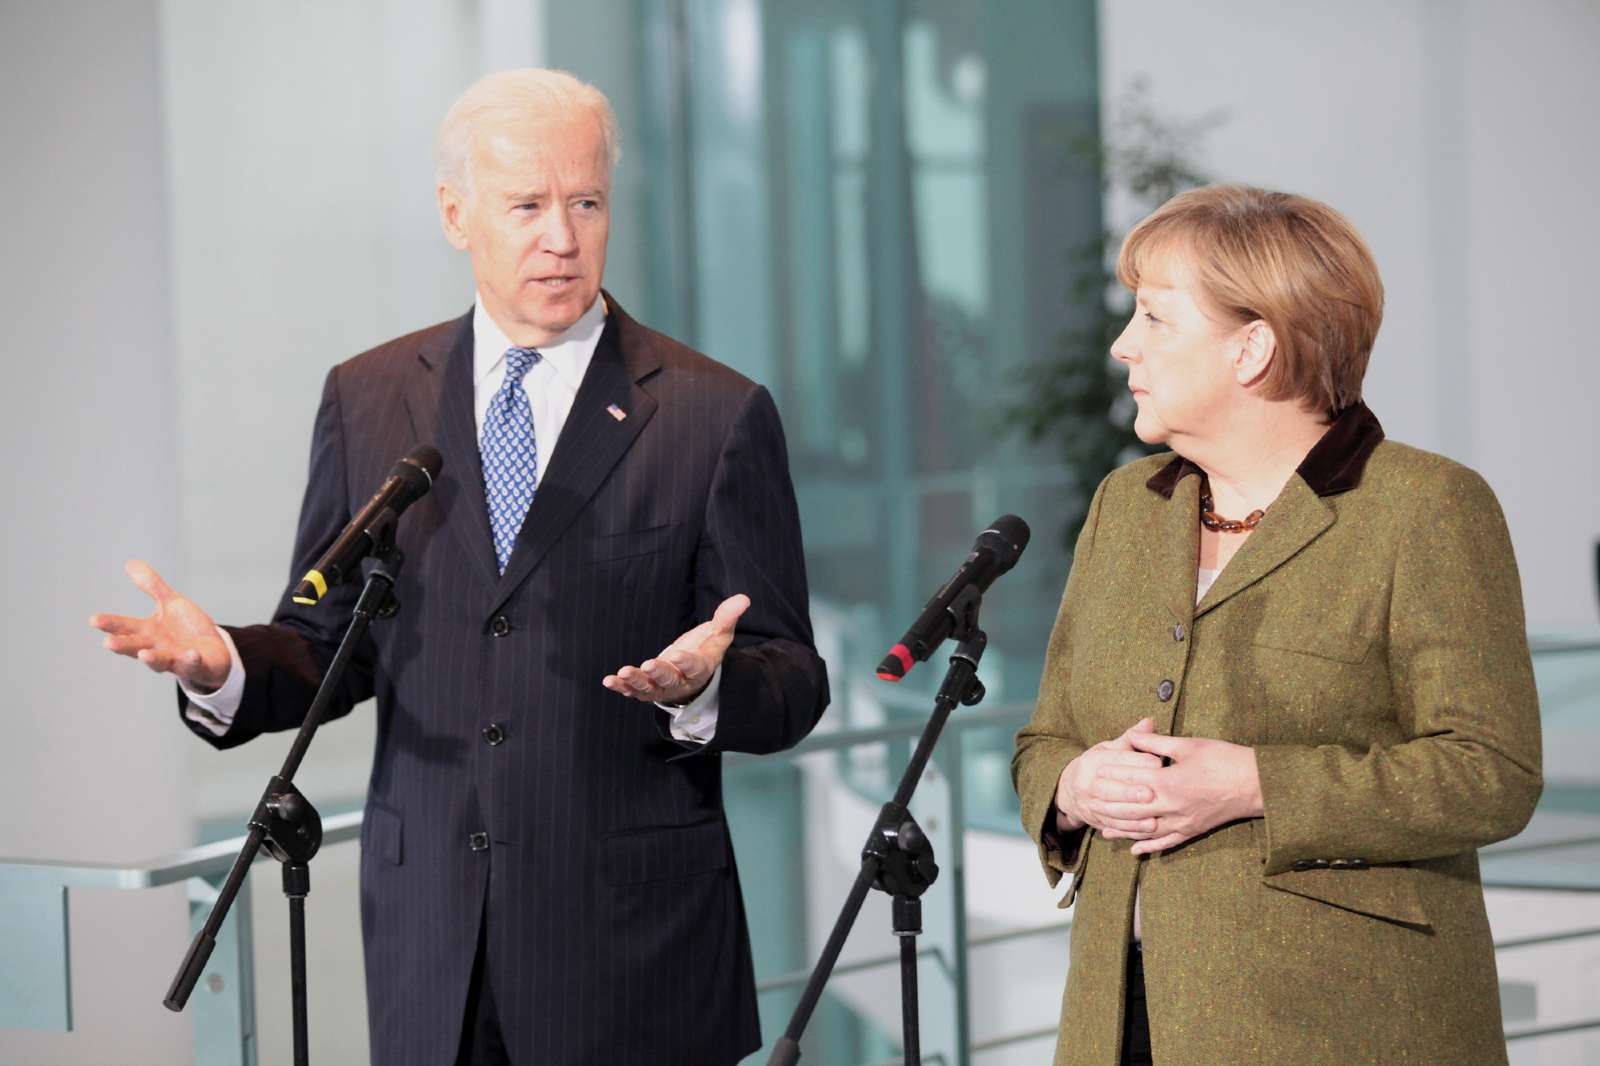 Photo: Vice President Joe Biden gives his remarks to the press. February 1, 2013. Credit: United States Embassy of Germany